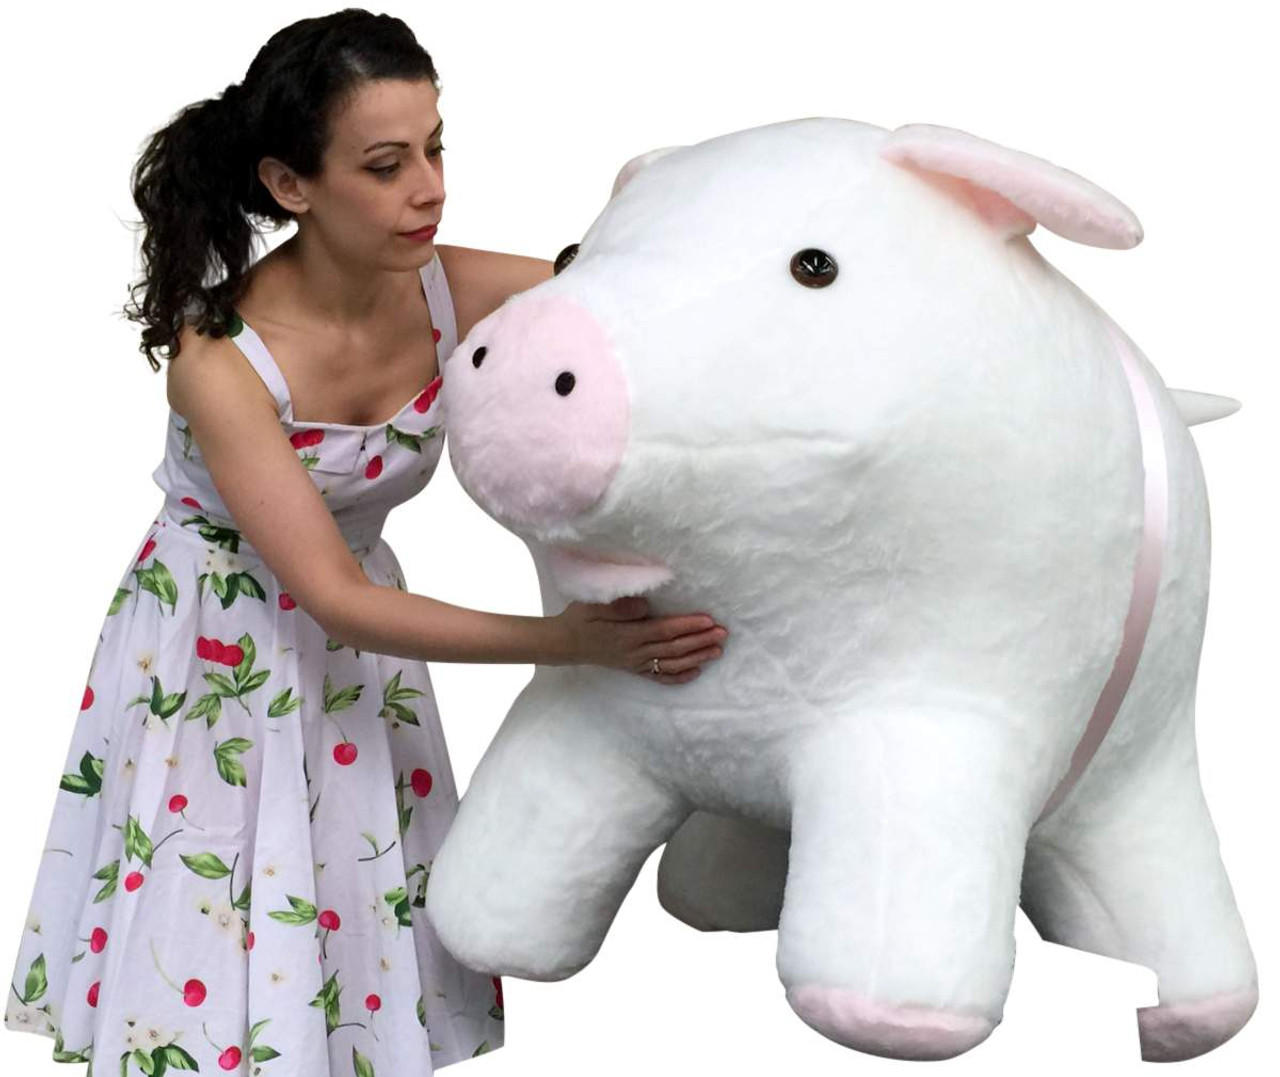 American Made Giant Stuffed Pig 40 Inch Soft White with Pink Accents 3 Feet  Wide Made in USA - Big Plush Personalized Giant Teddy Bears Custom Stuffed  Animals